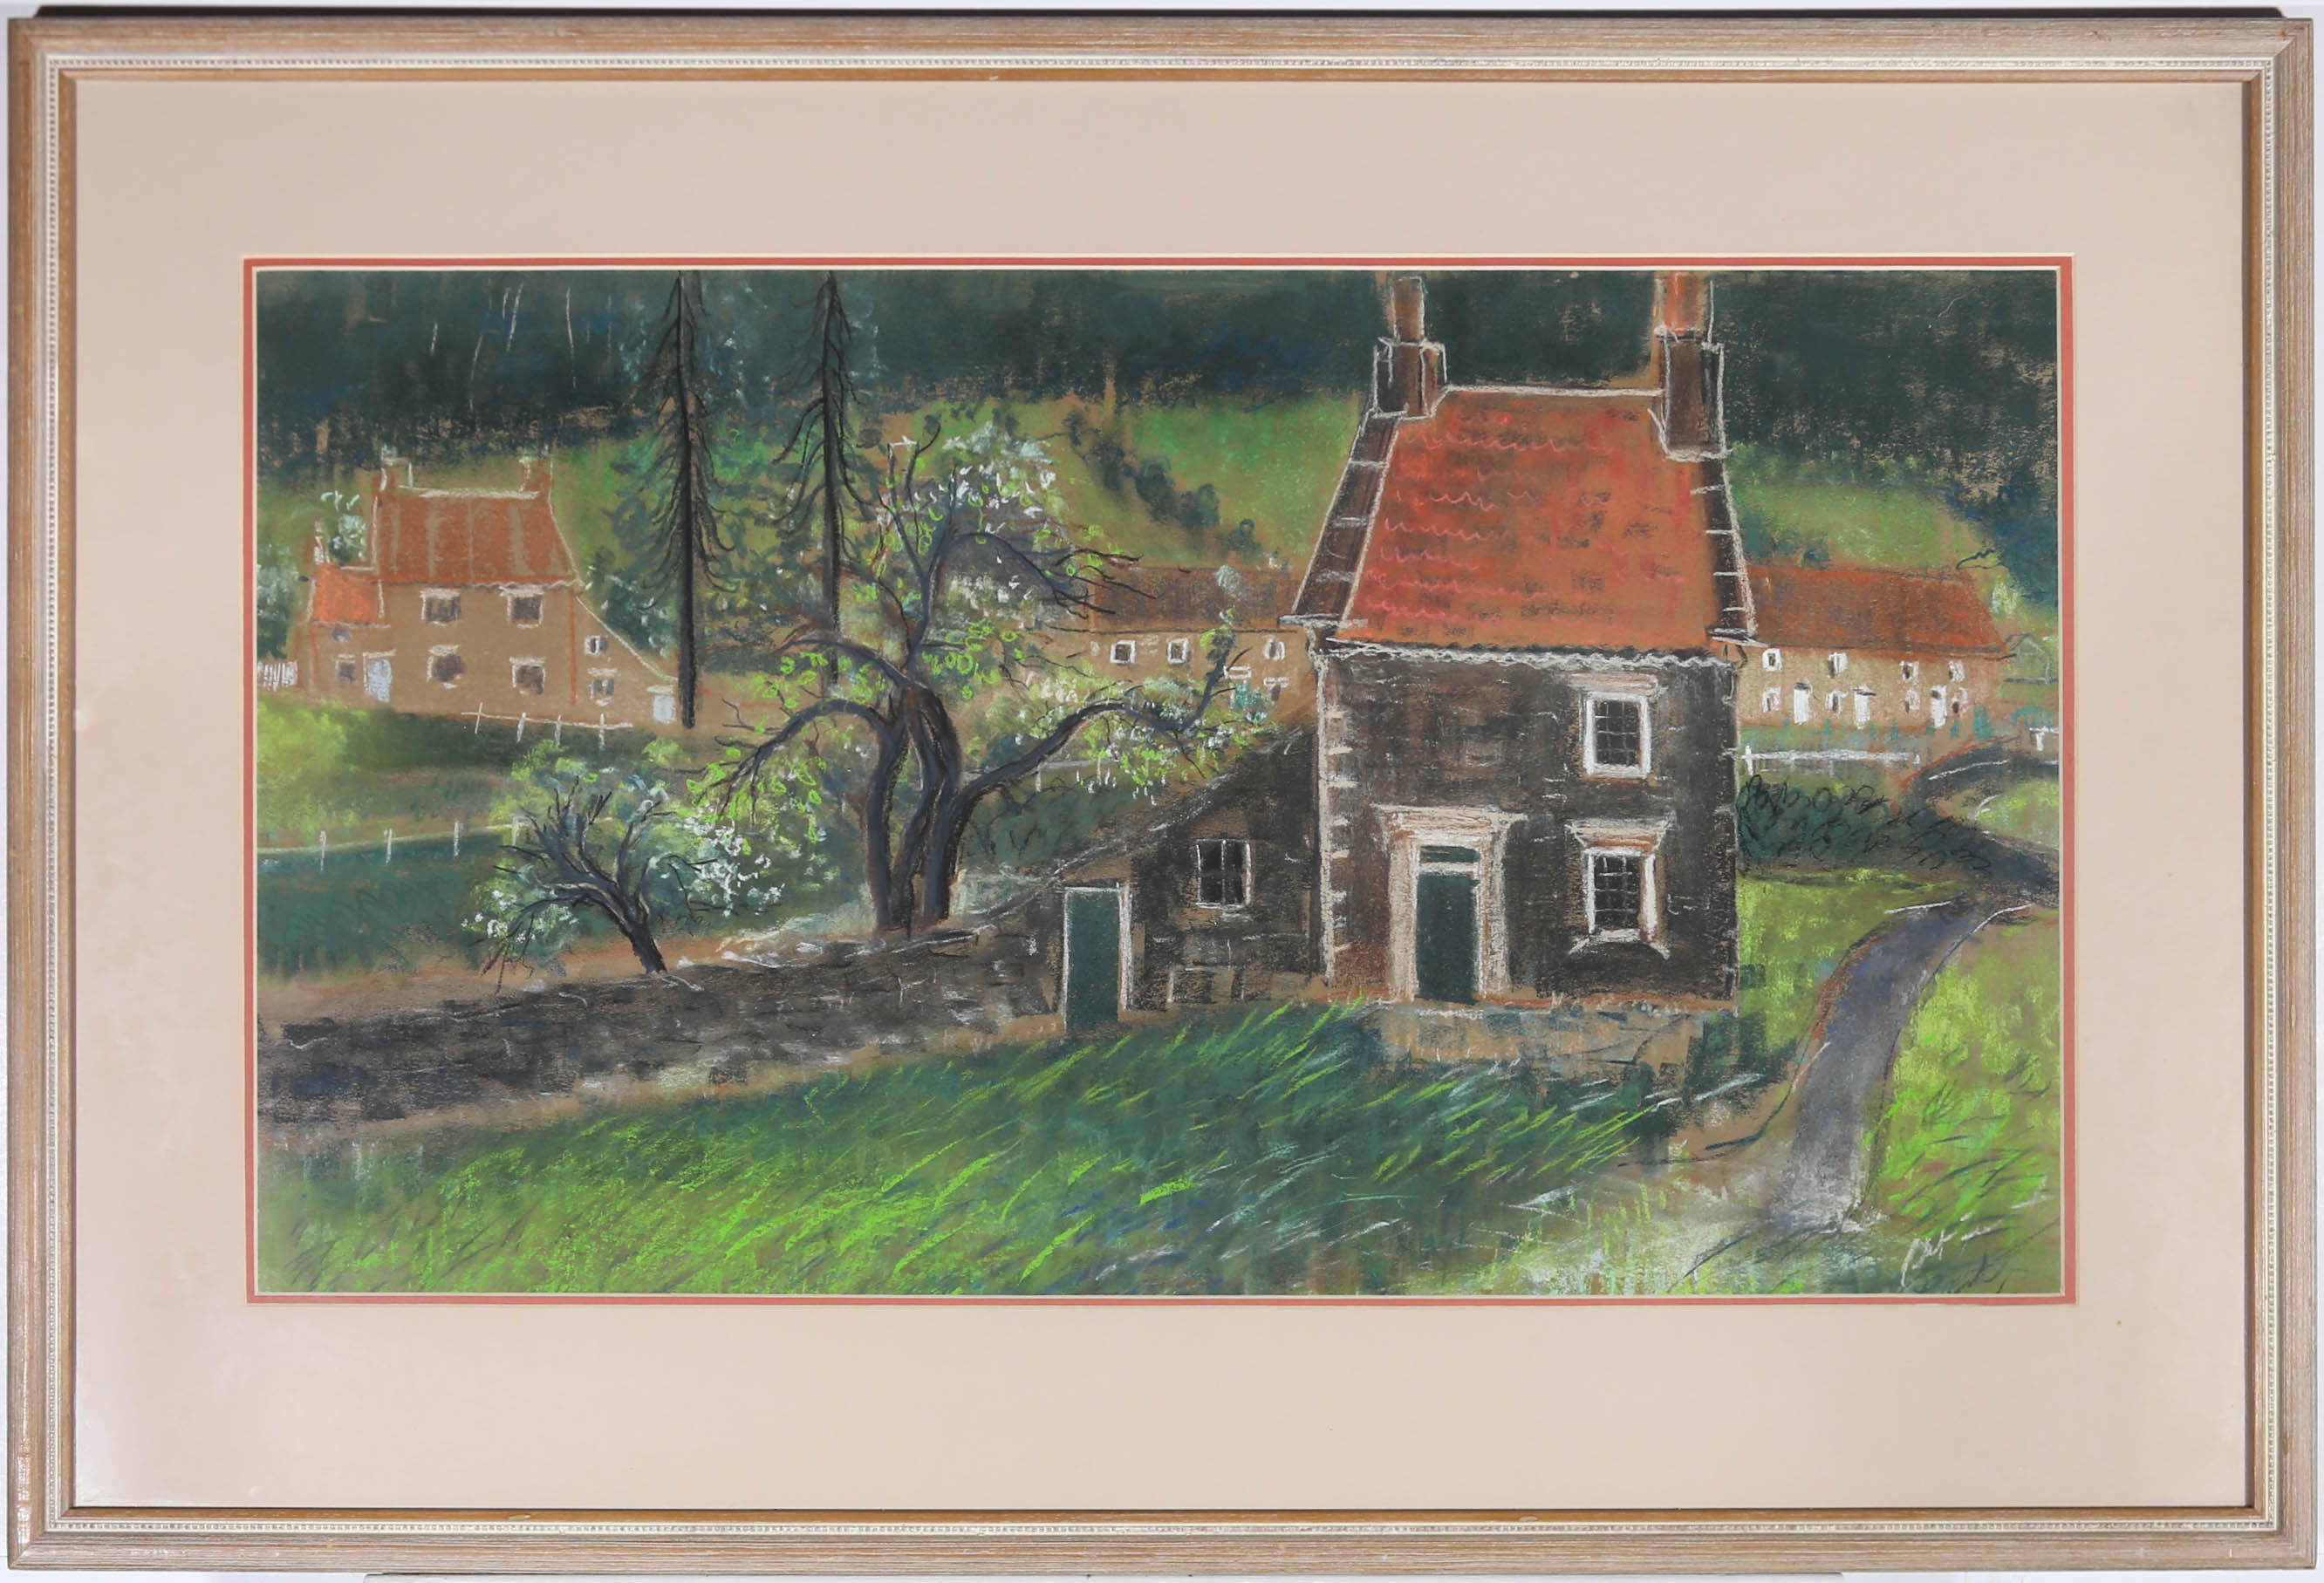 This charming pastel study depicts the village of Hutton-le hole on North Yorkshire. the artist uses a stylised technique to capture the quaint cottages winding trees in the country landscape. Unsigned. artist name and title inscribed to gallery